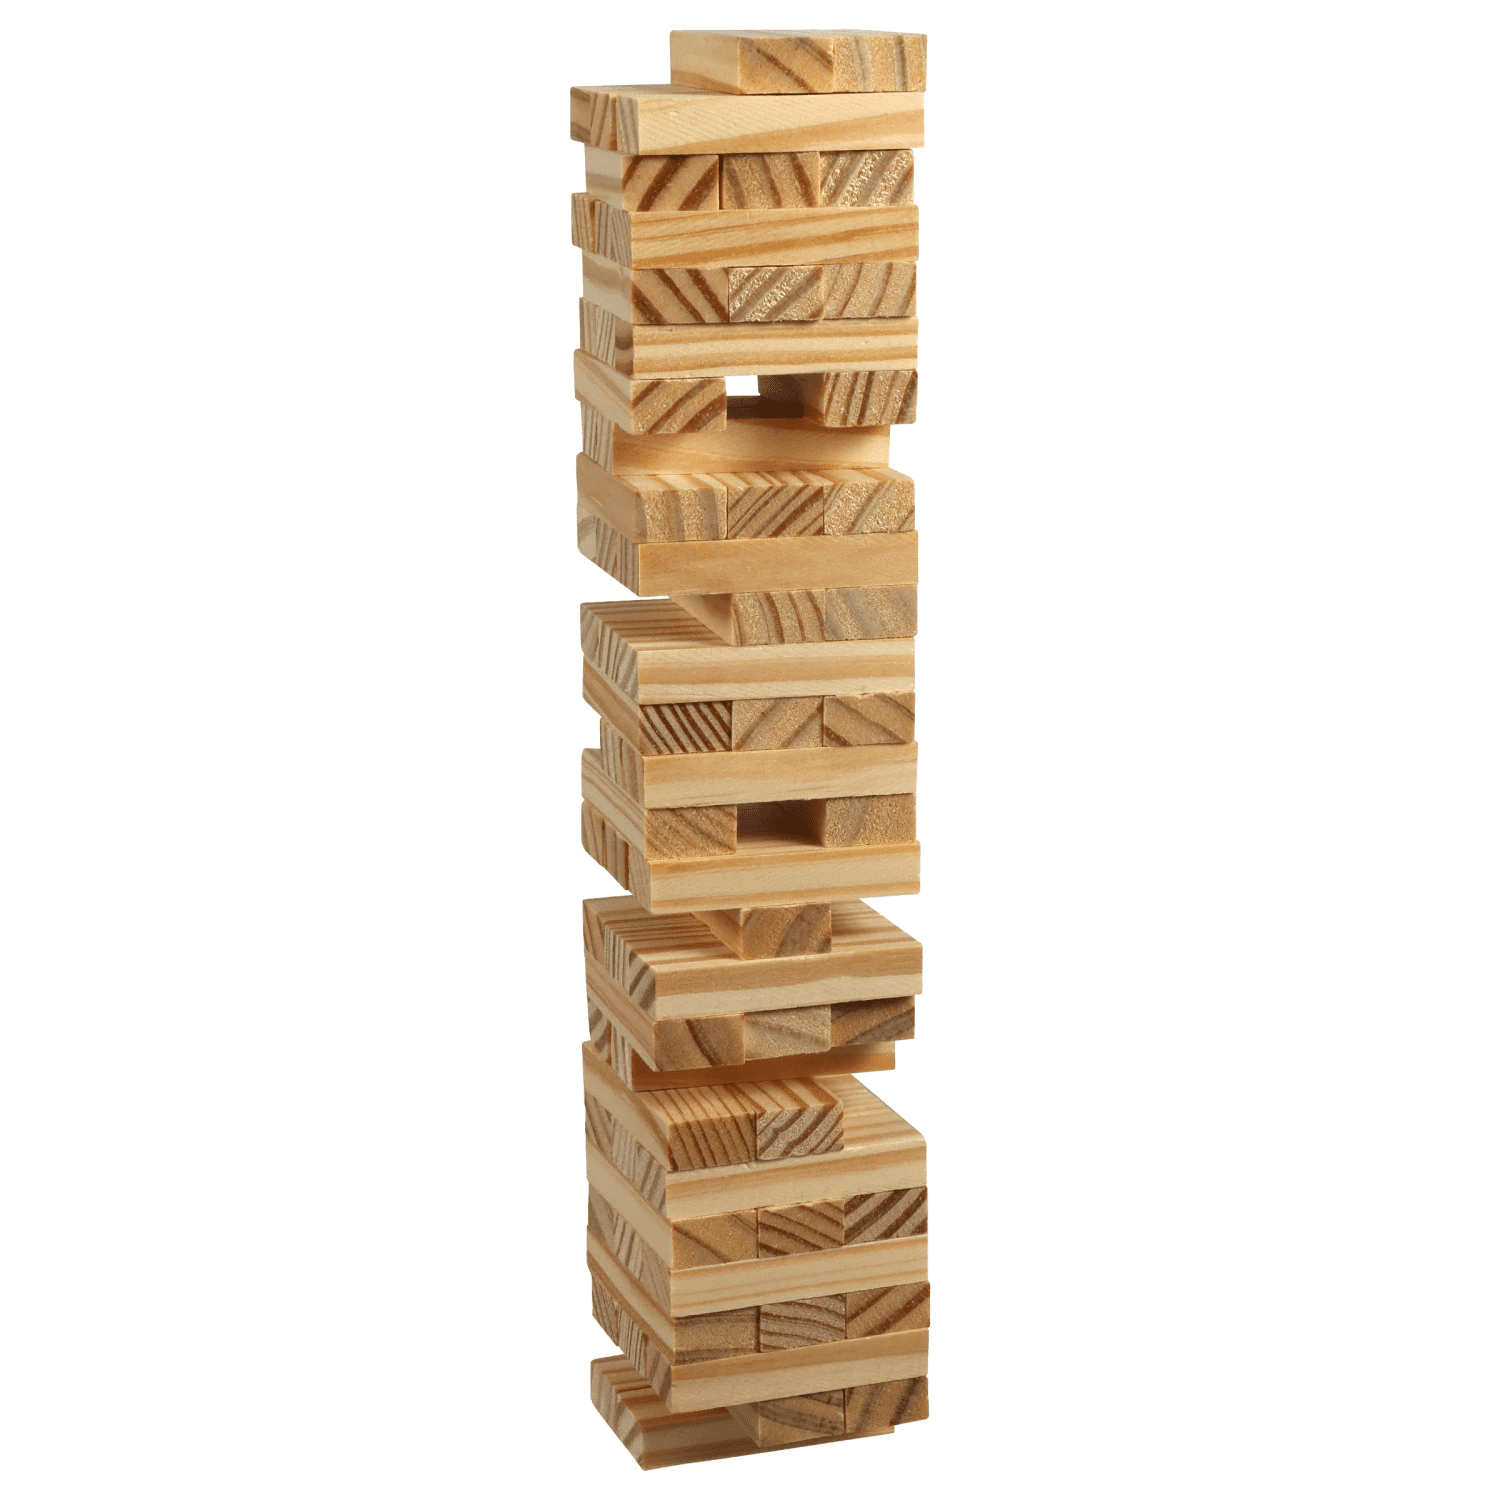 Tumble Tower Game 36 Wood Blocks Greenbrier International for sale online 